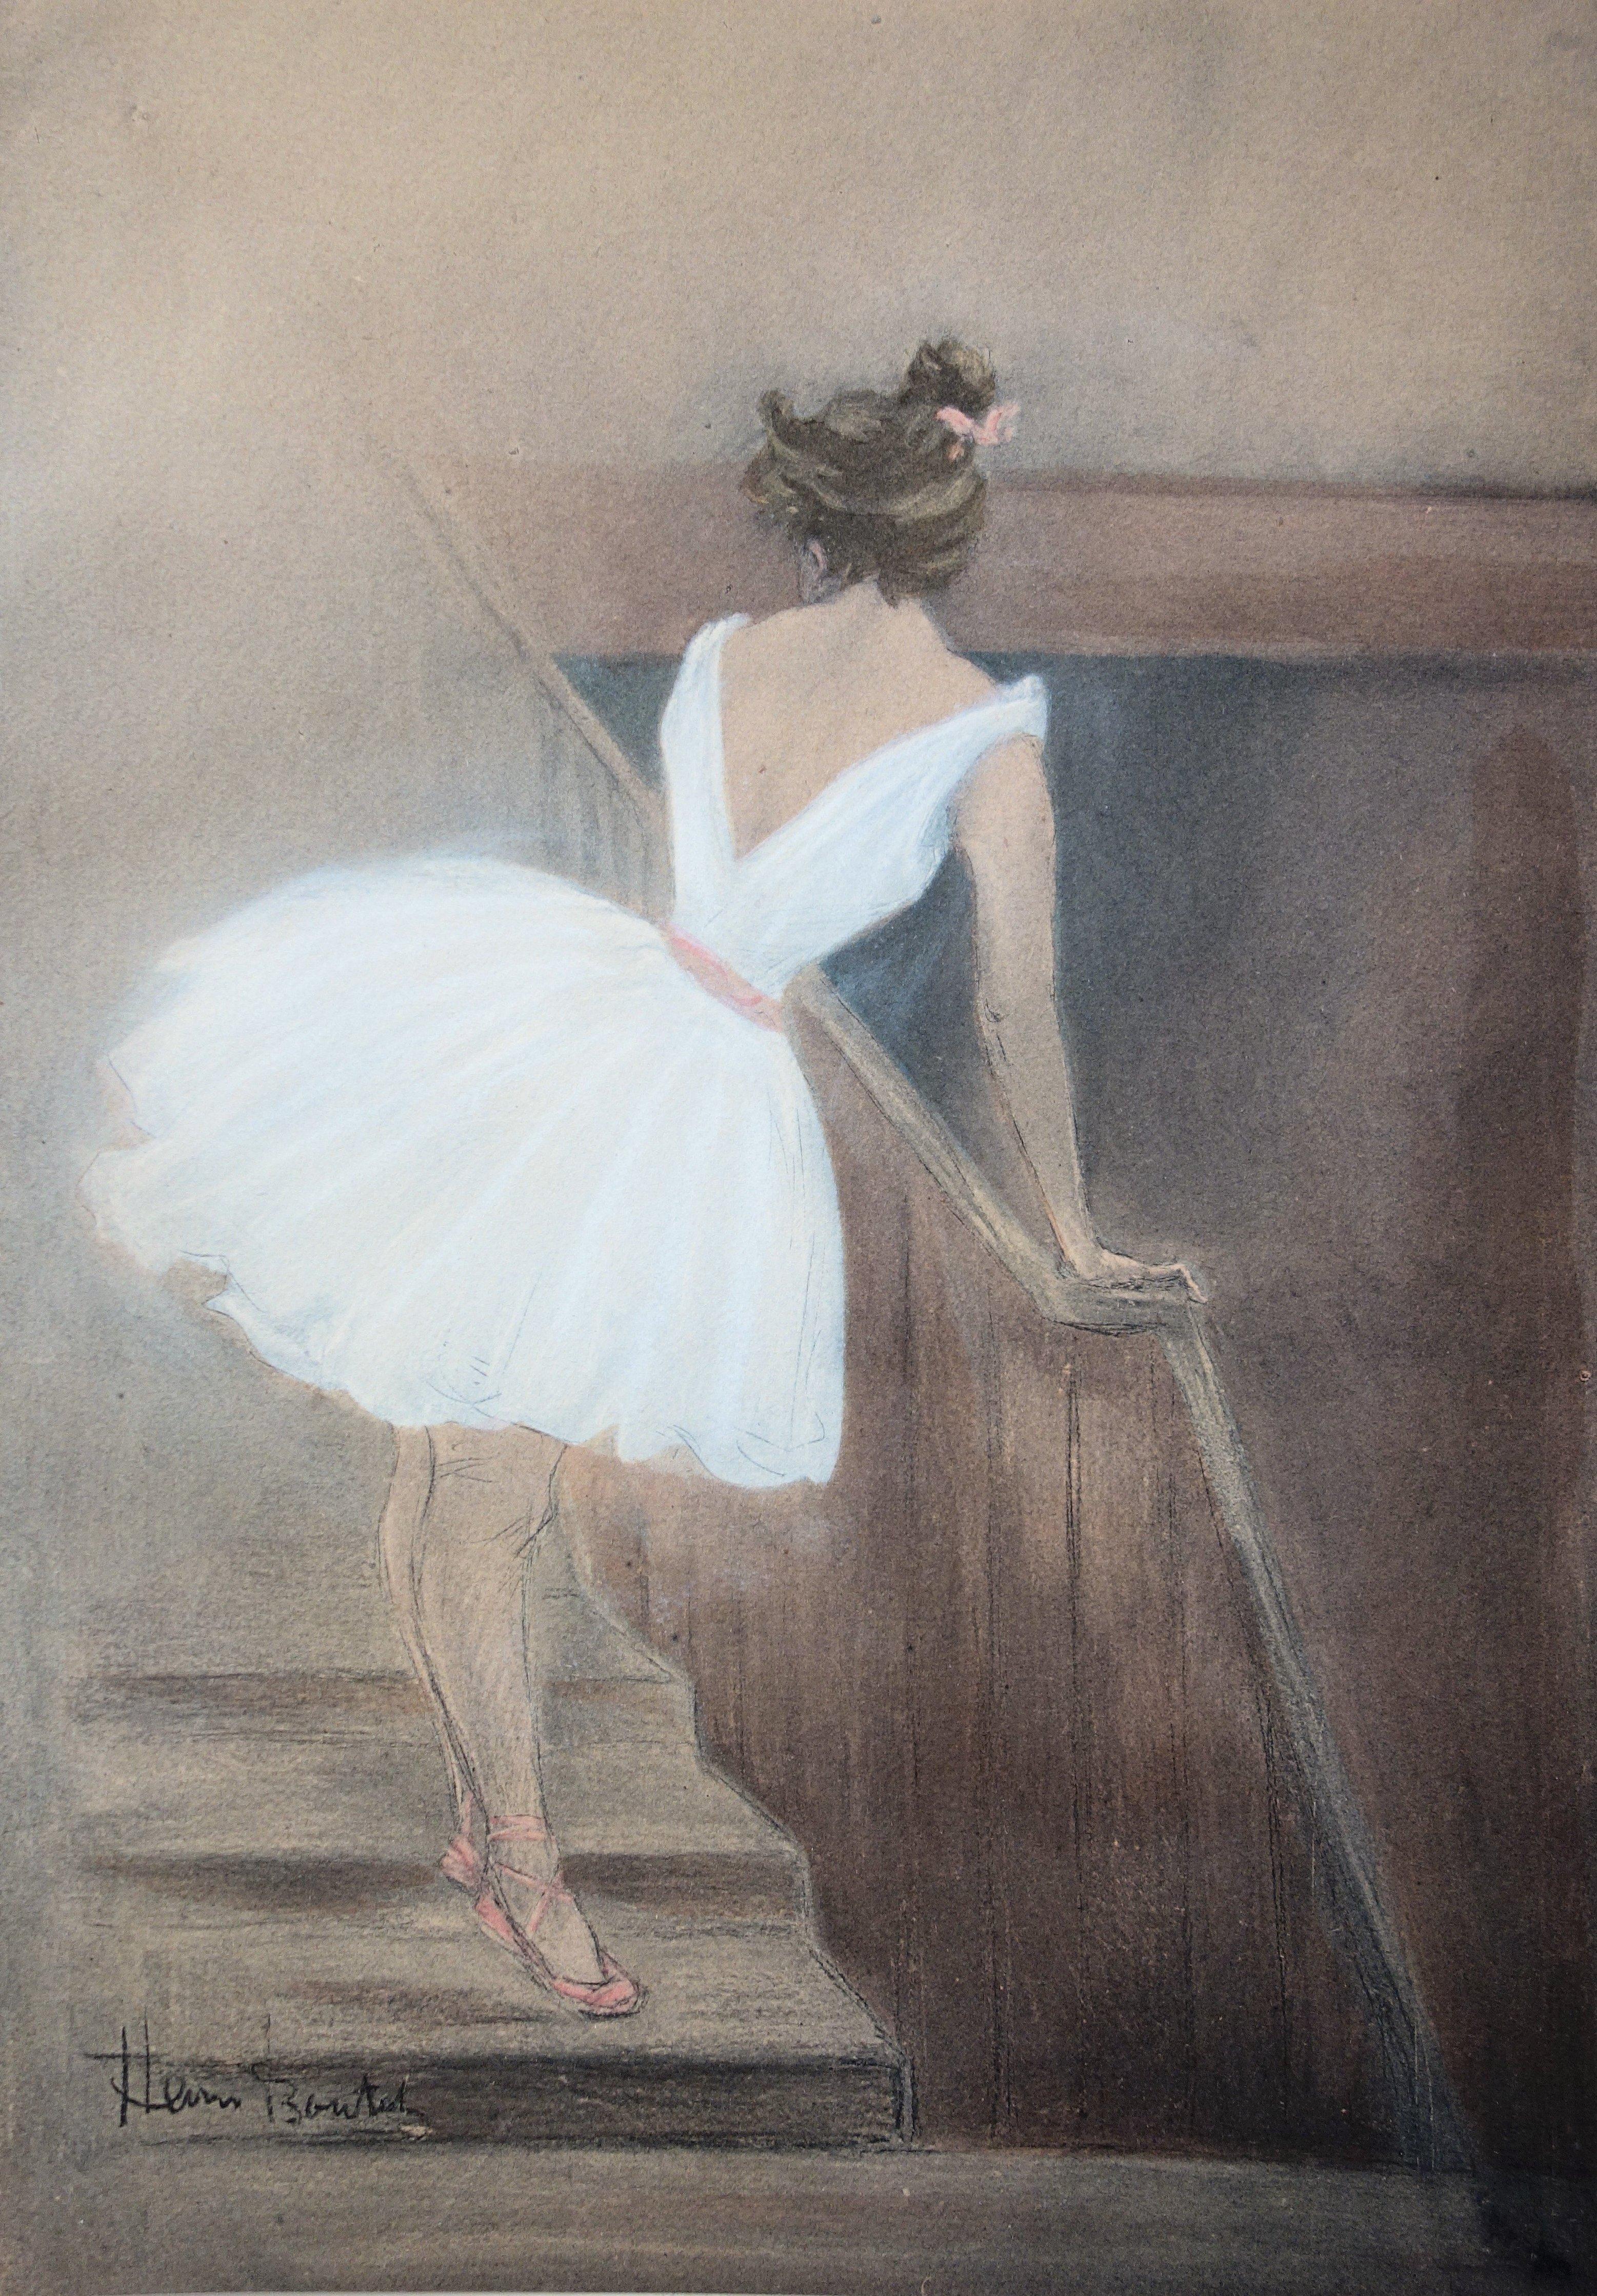 Henri BOUTET (1851 - 1919)
Ballerina in the Stairs

Original litograph
Platesigned
1897/98
Printed on paper Vélin 
Size 40 x 31 cm (c. 16 x 12